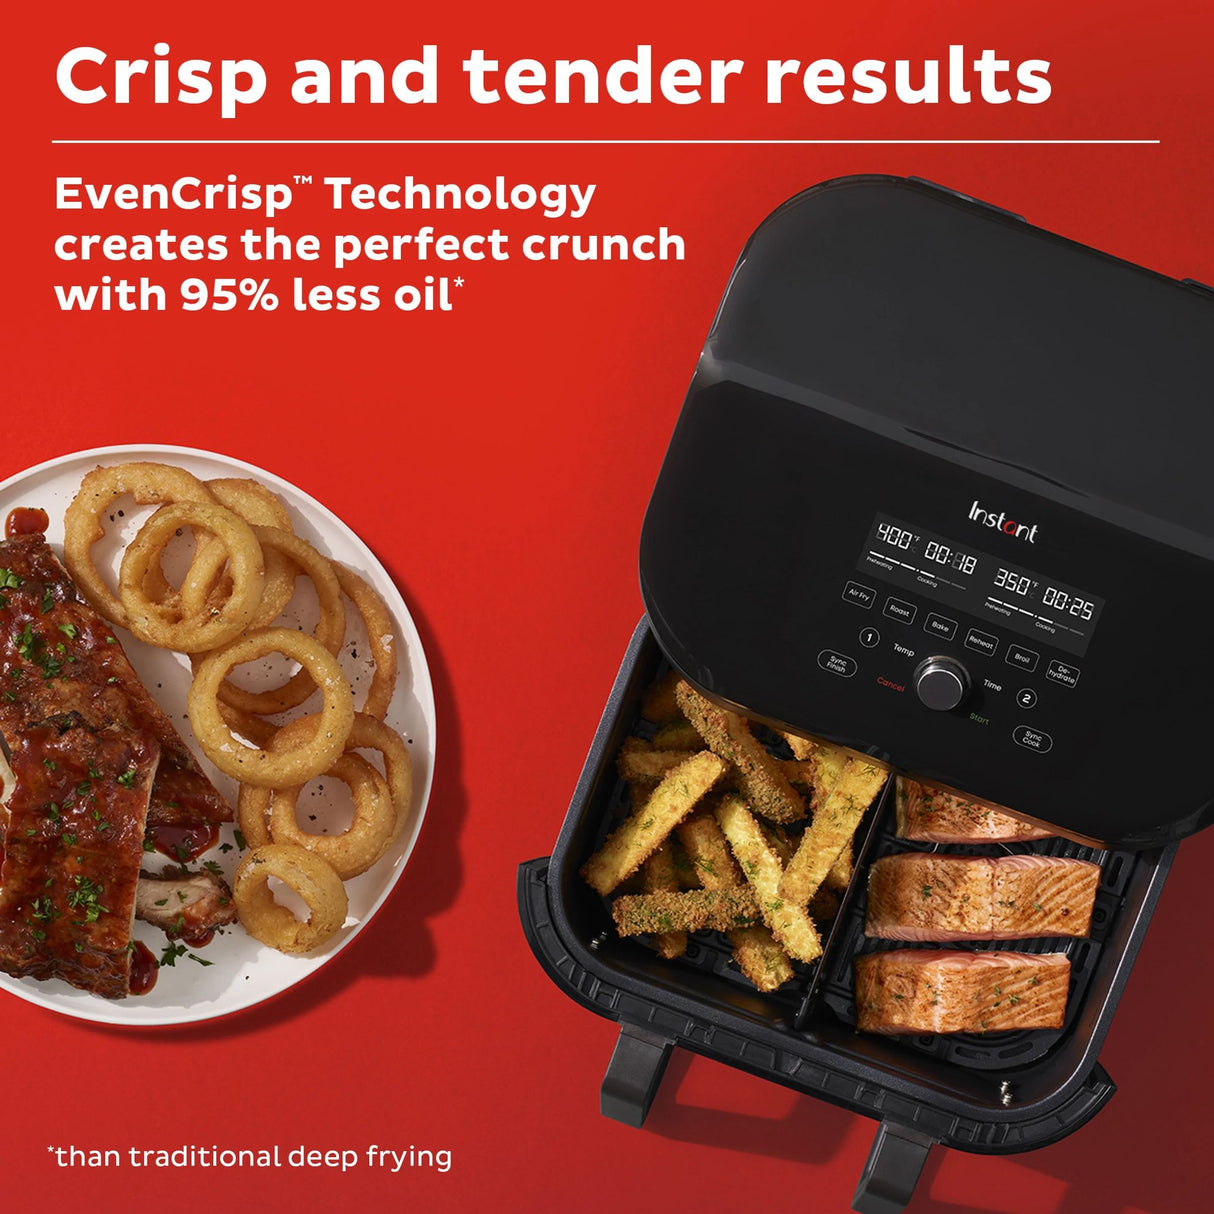  Instant Vortex 9-qt Air Fryer with VersaZone Technology with text Crisp and tender results